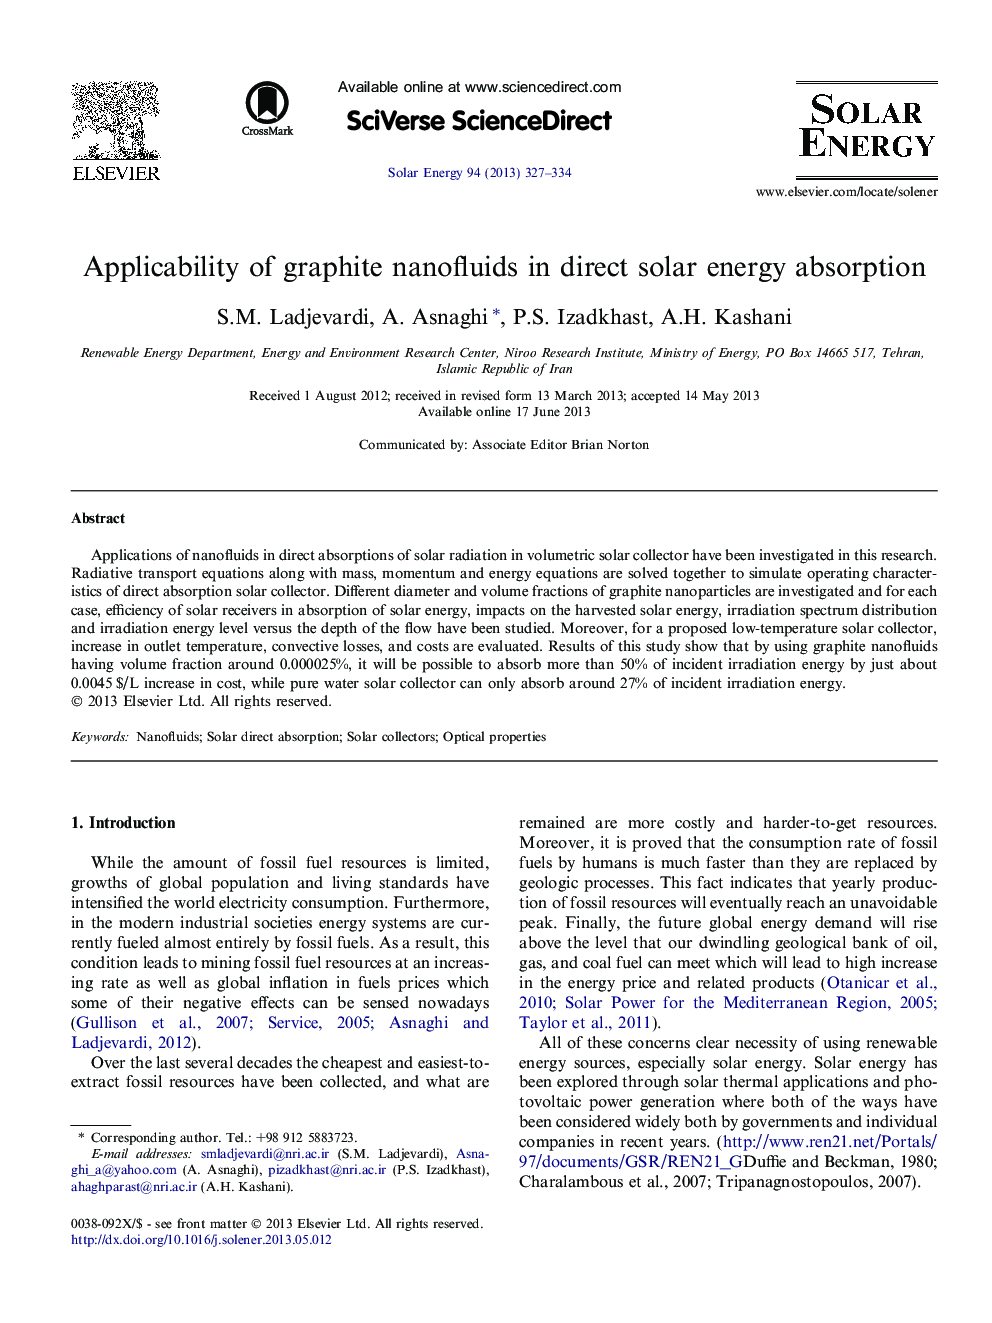 Applicability of graphite nanofluids in direct solar energy absorption